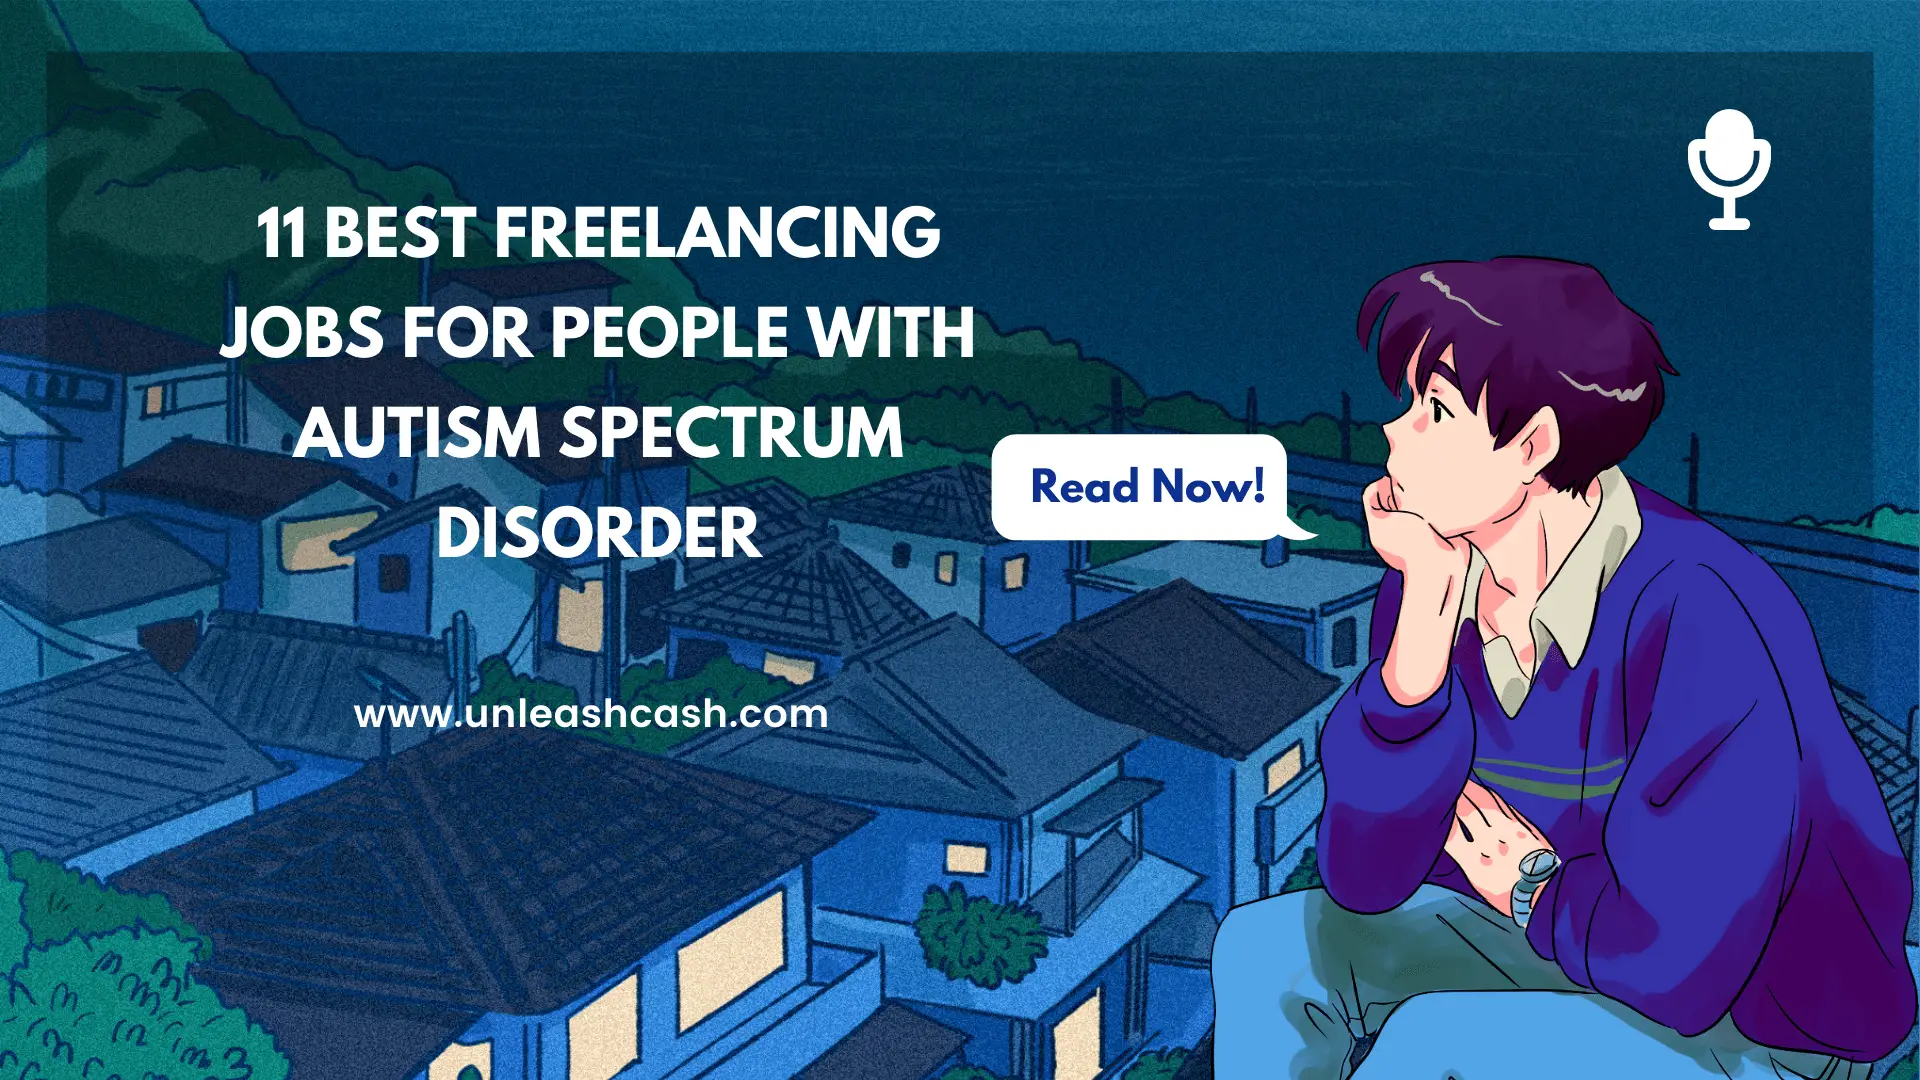 11 Best Freelancing Jobs For People With Autism Spectrum Disorder